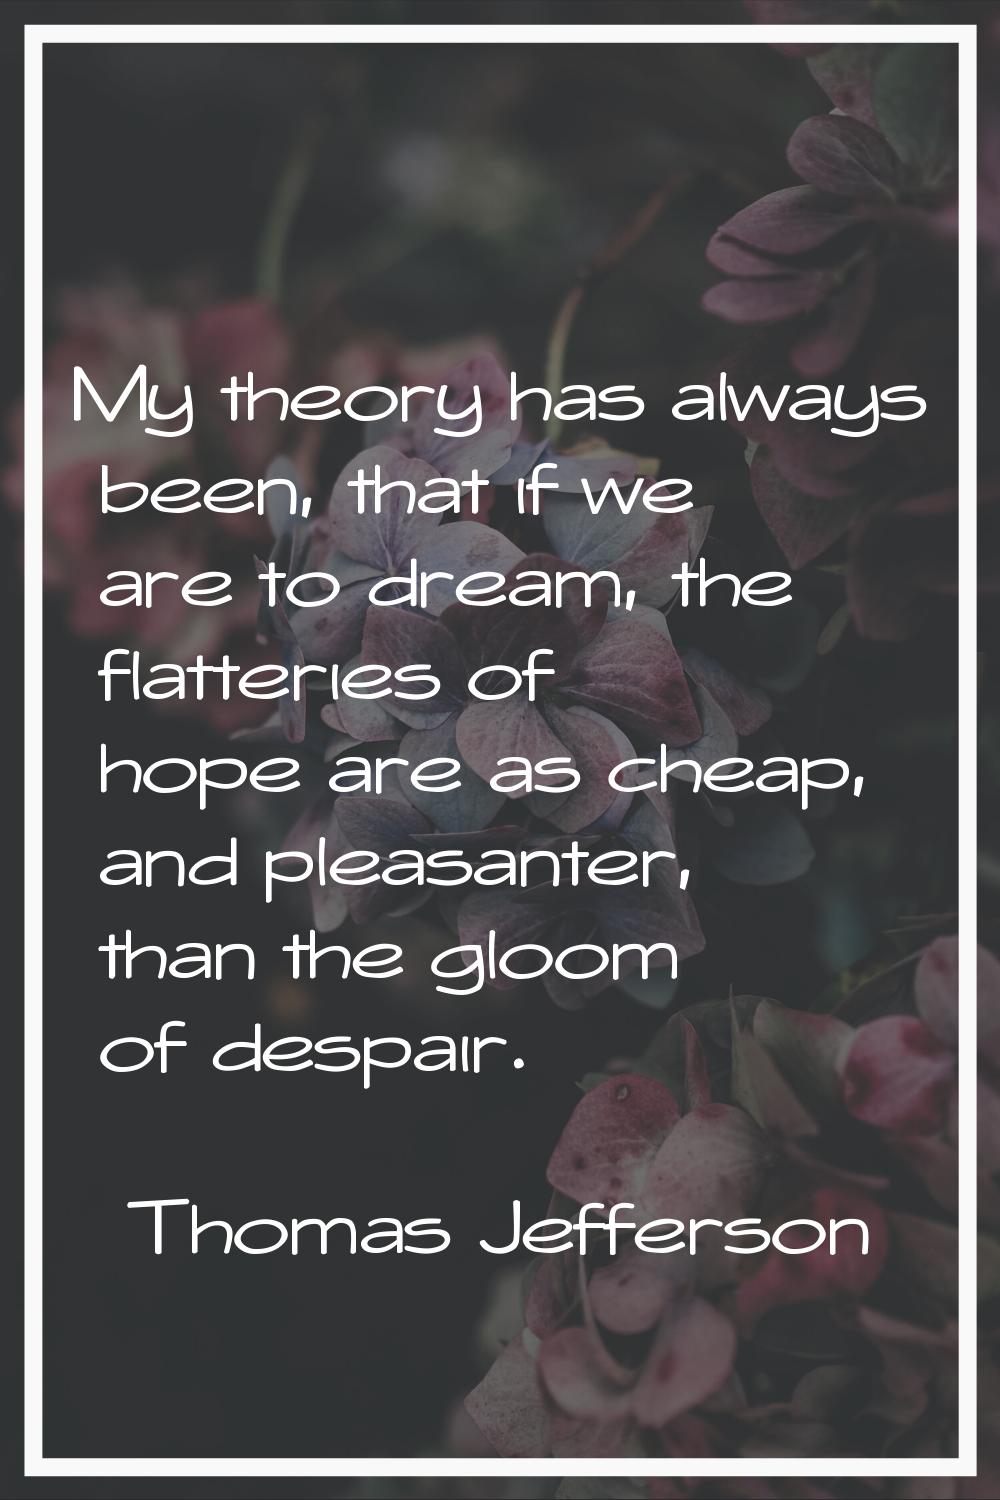 My theory has always been, that if we are to dream, the flatteries of hope are as cheap, and pleasa